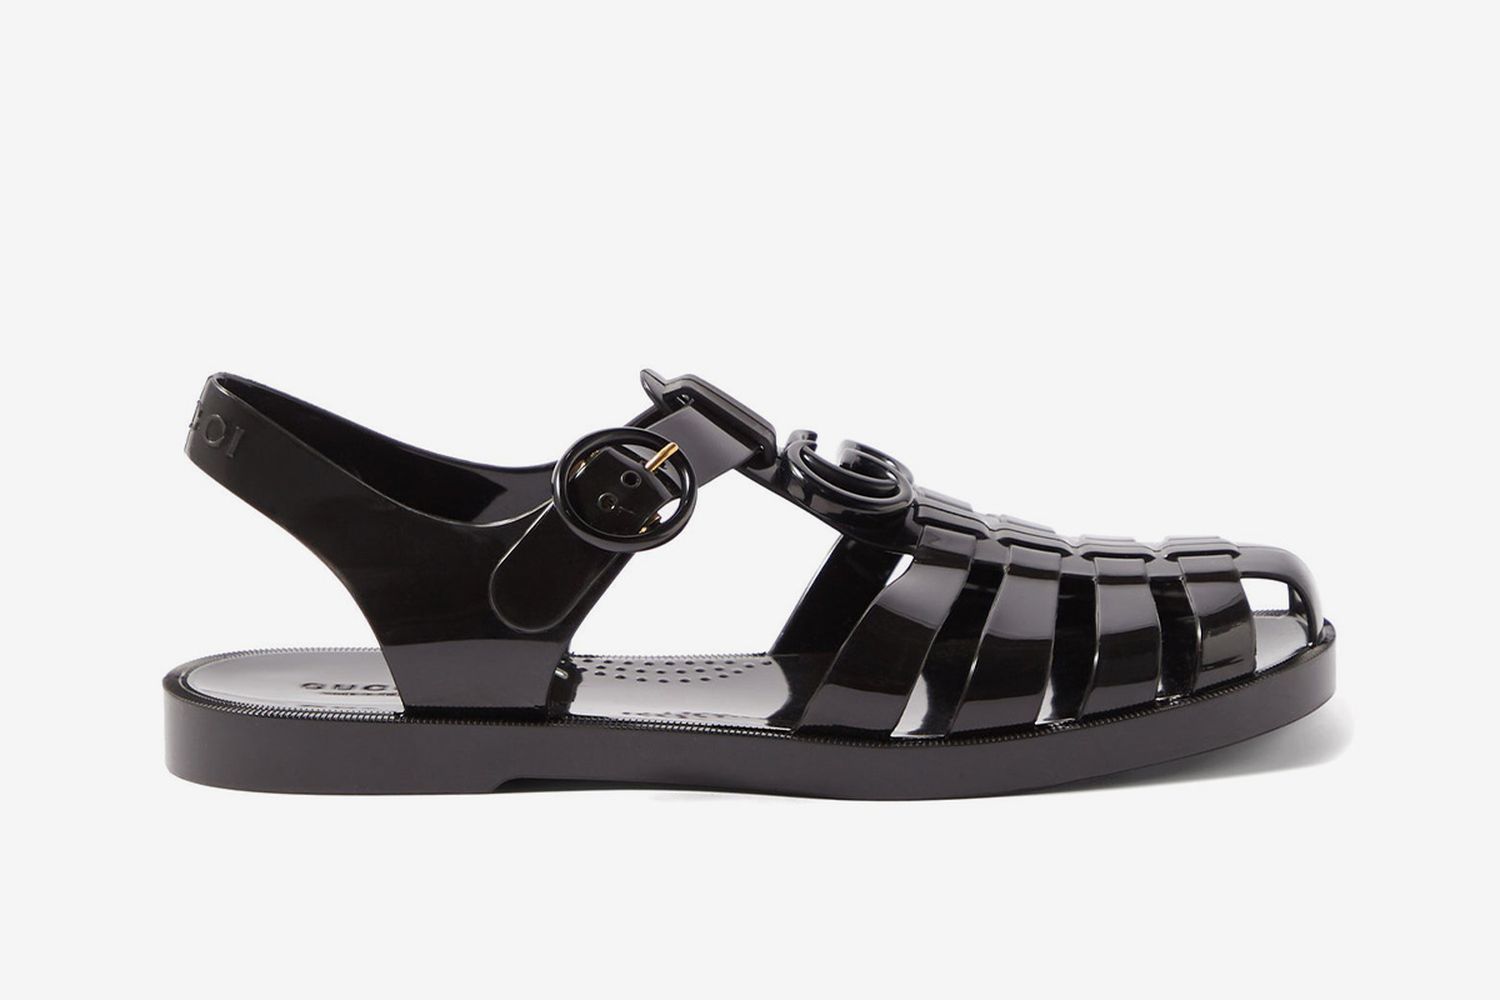 Gebeurt roddel Mitt Gucci Jelly Shoes: Shop the Gucci Rubber Sandals Here